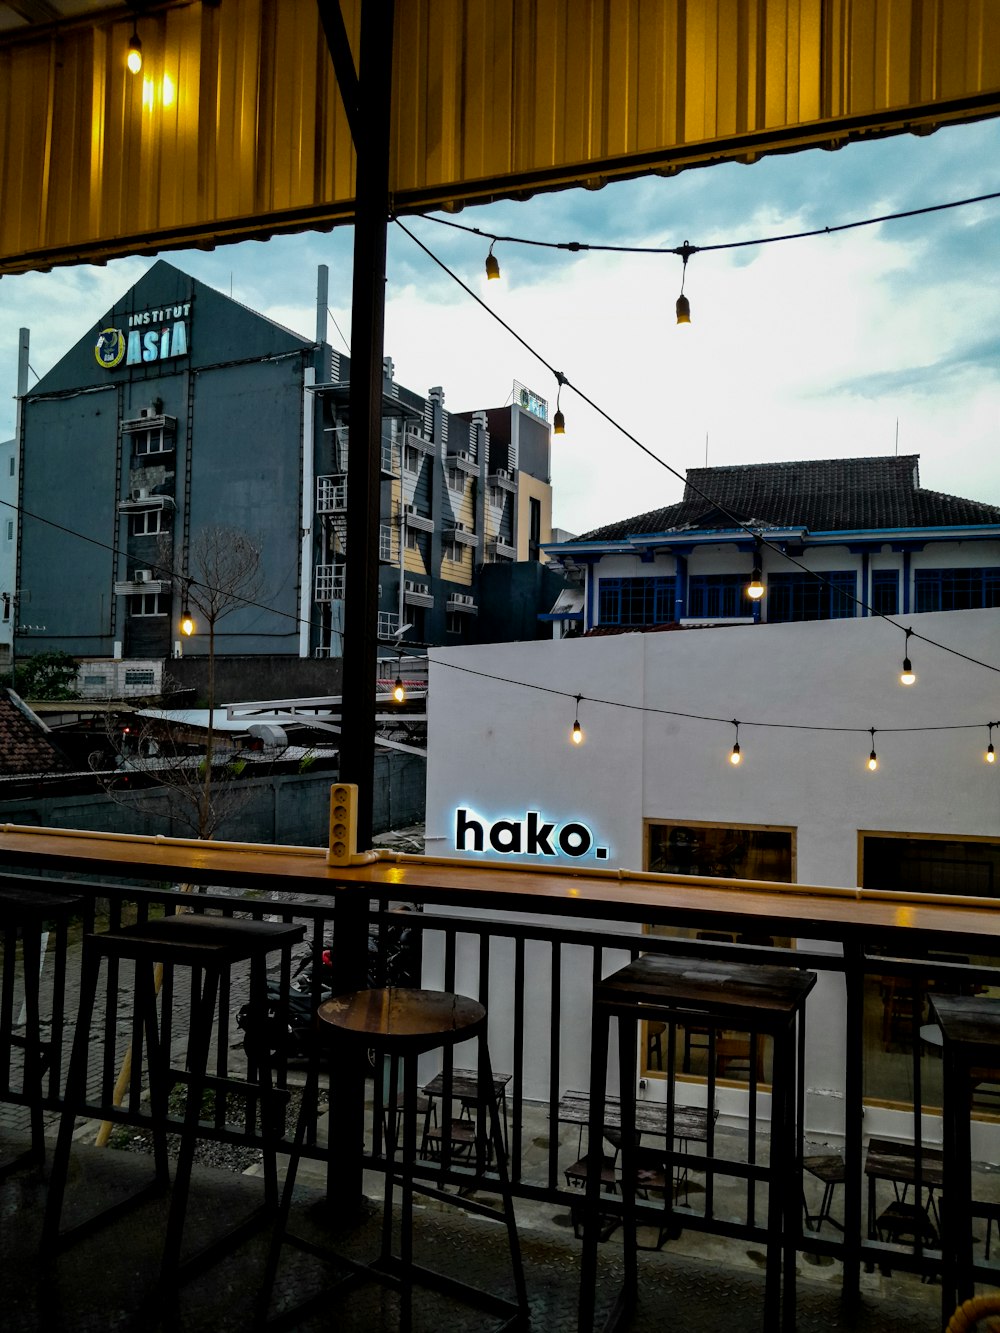 a restaurant with a sign that says hako on it